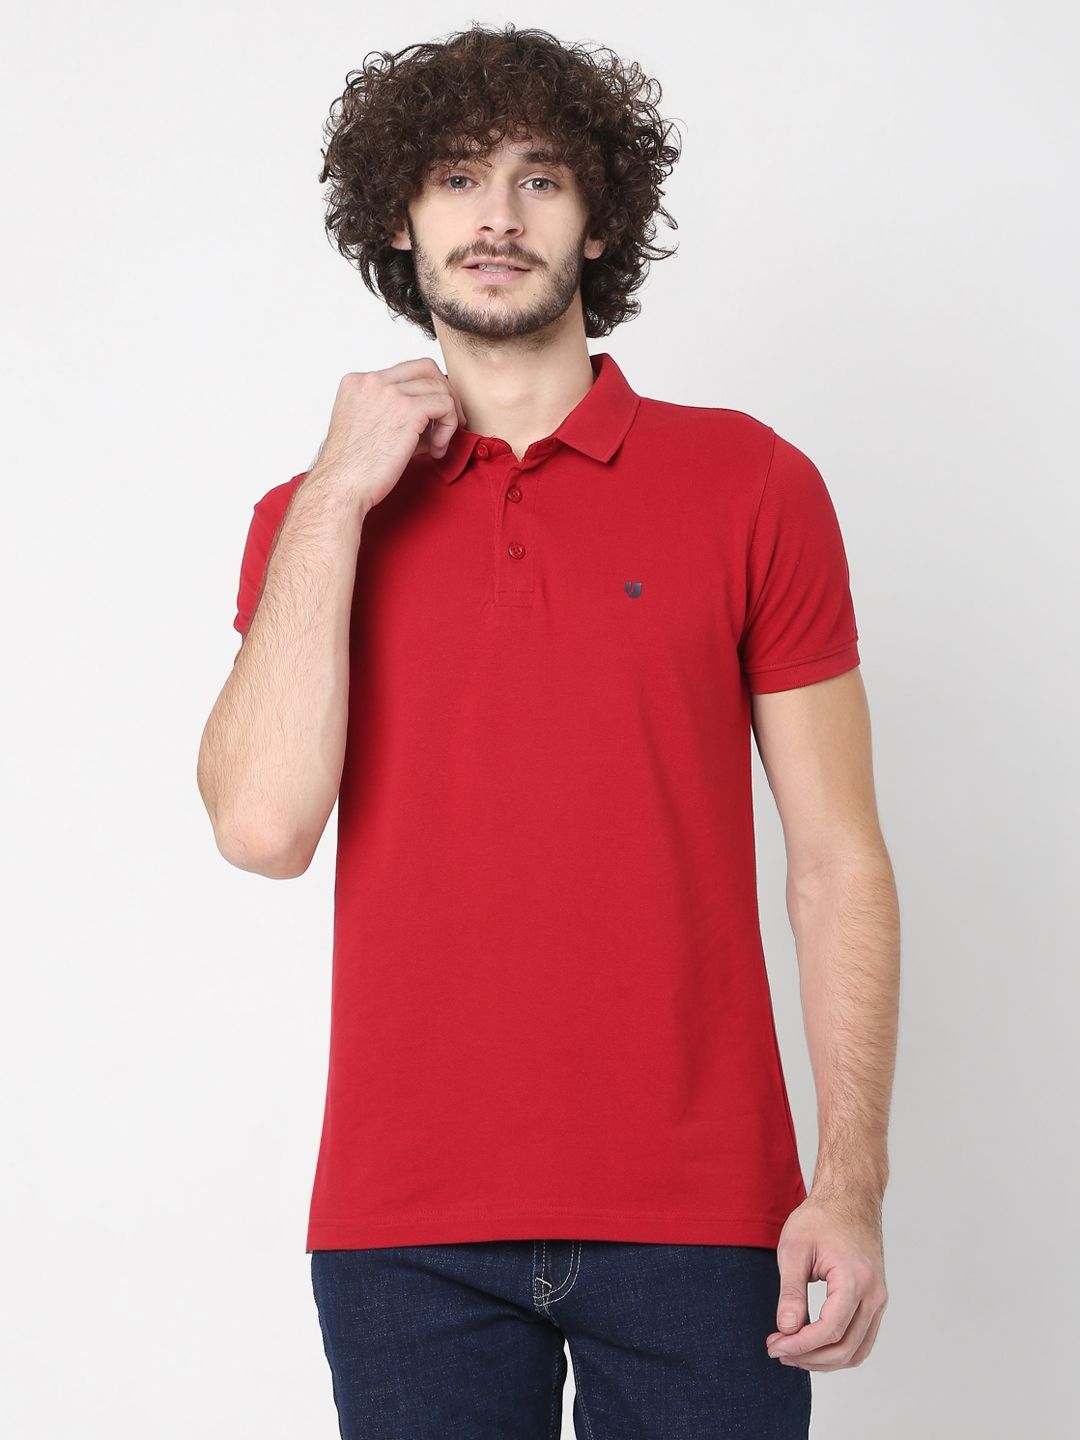 Spykar | Underjeans by Spykar Red Cotton Slim Fit Polo T-shirt For Men